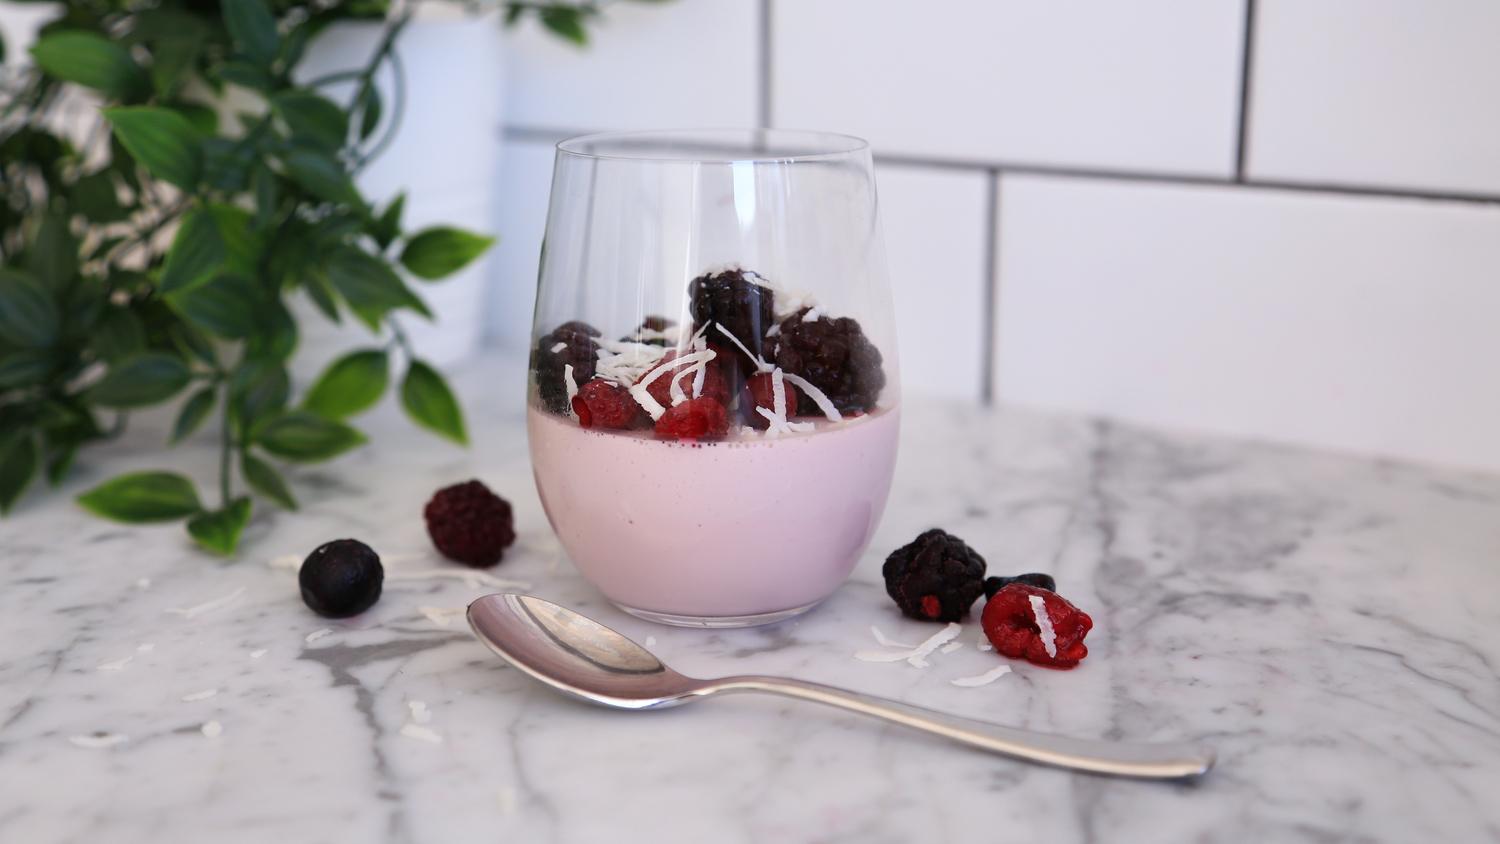 Low Carb Vanilla Berry Protein Pudding - PBCo.